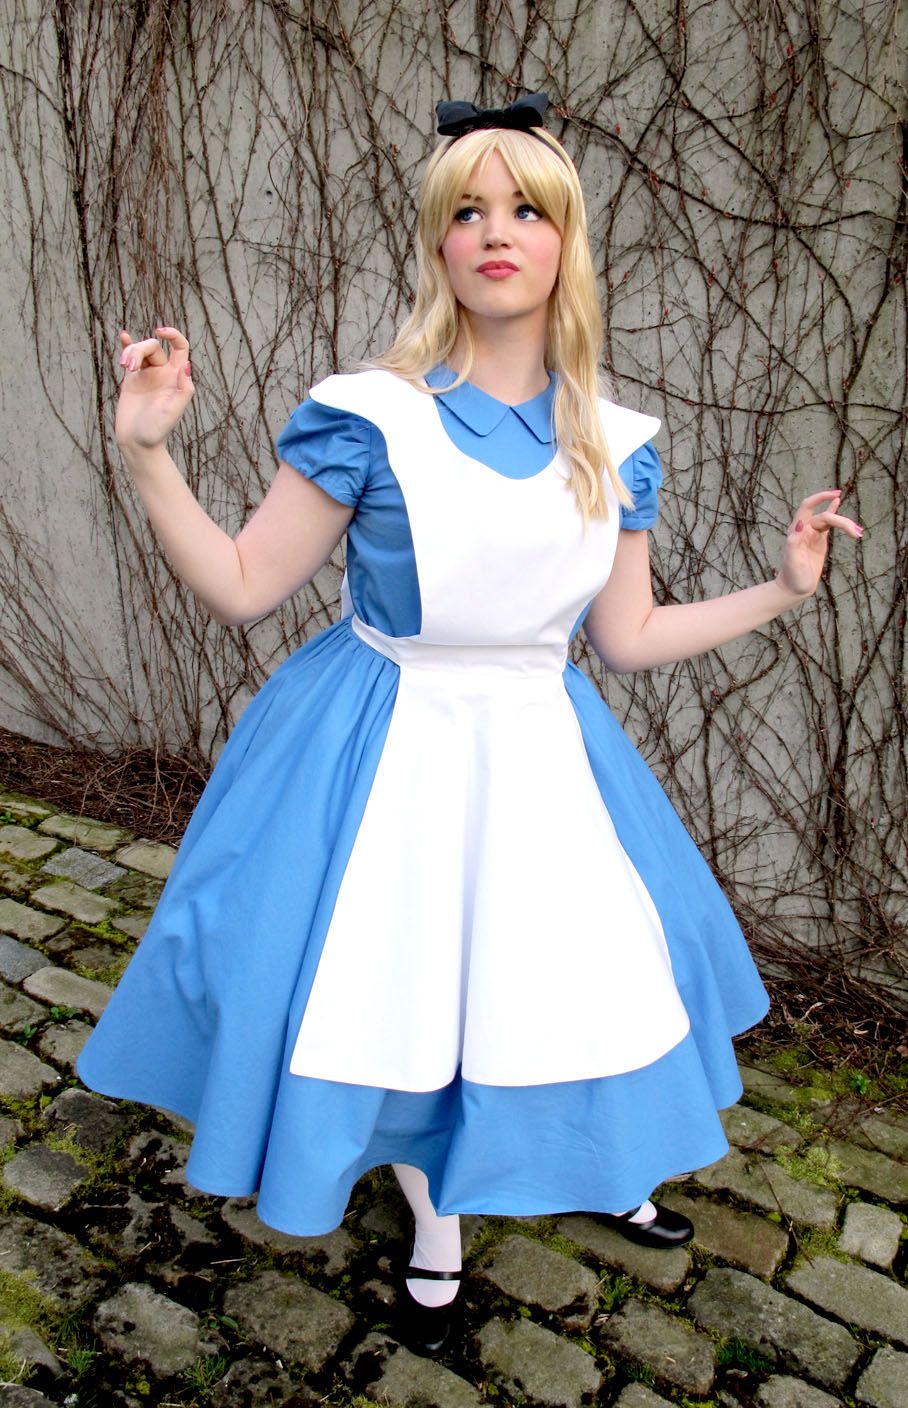 betsy suarez recommends images of alice in wonderland costumes pic